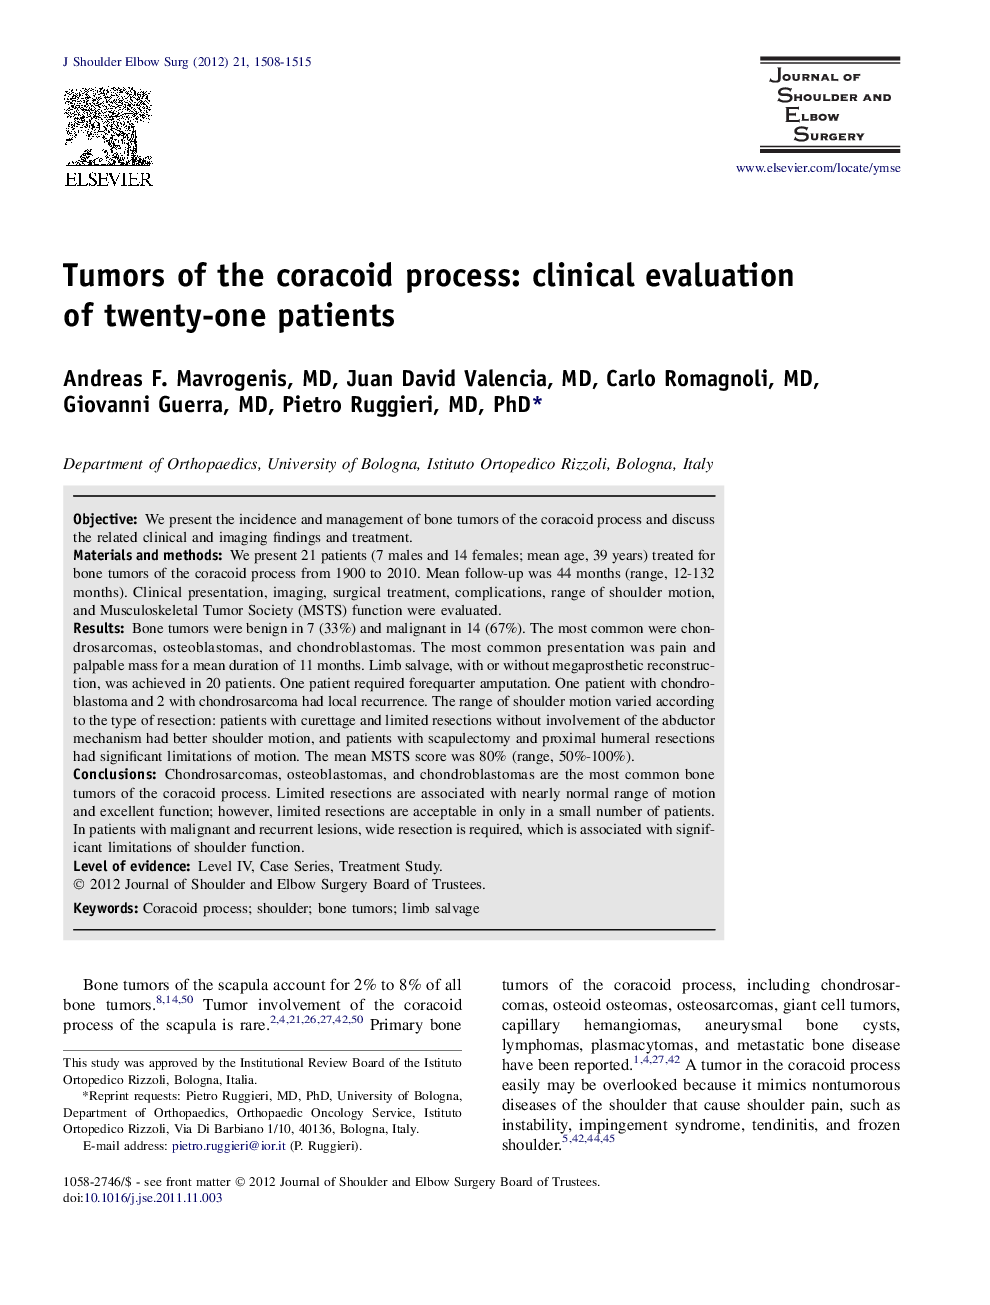 Tumors of the coracoid process: clinical evaluation of twenty-one patients 